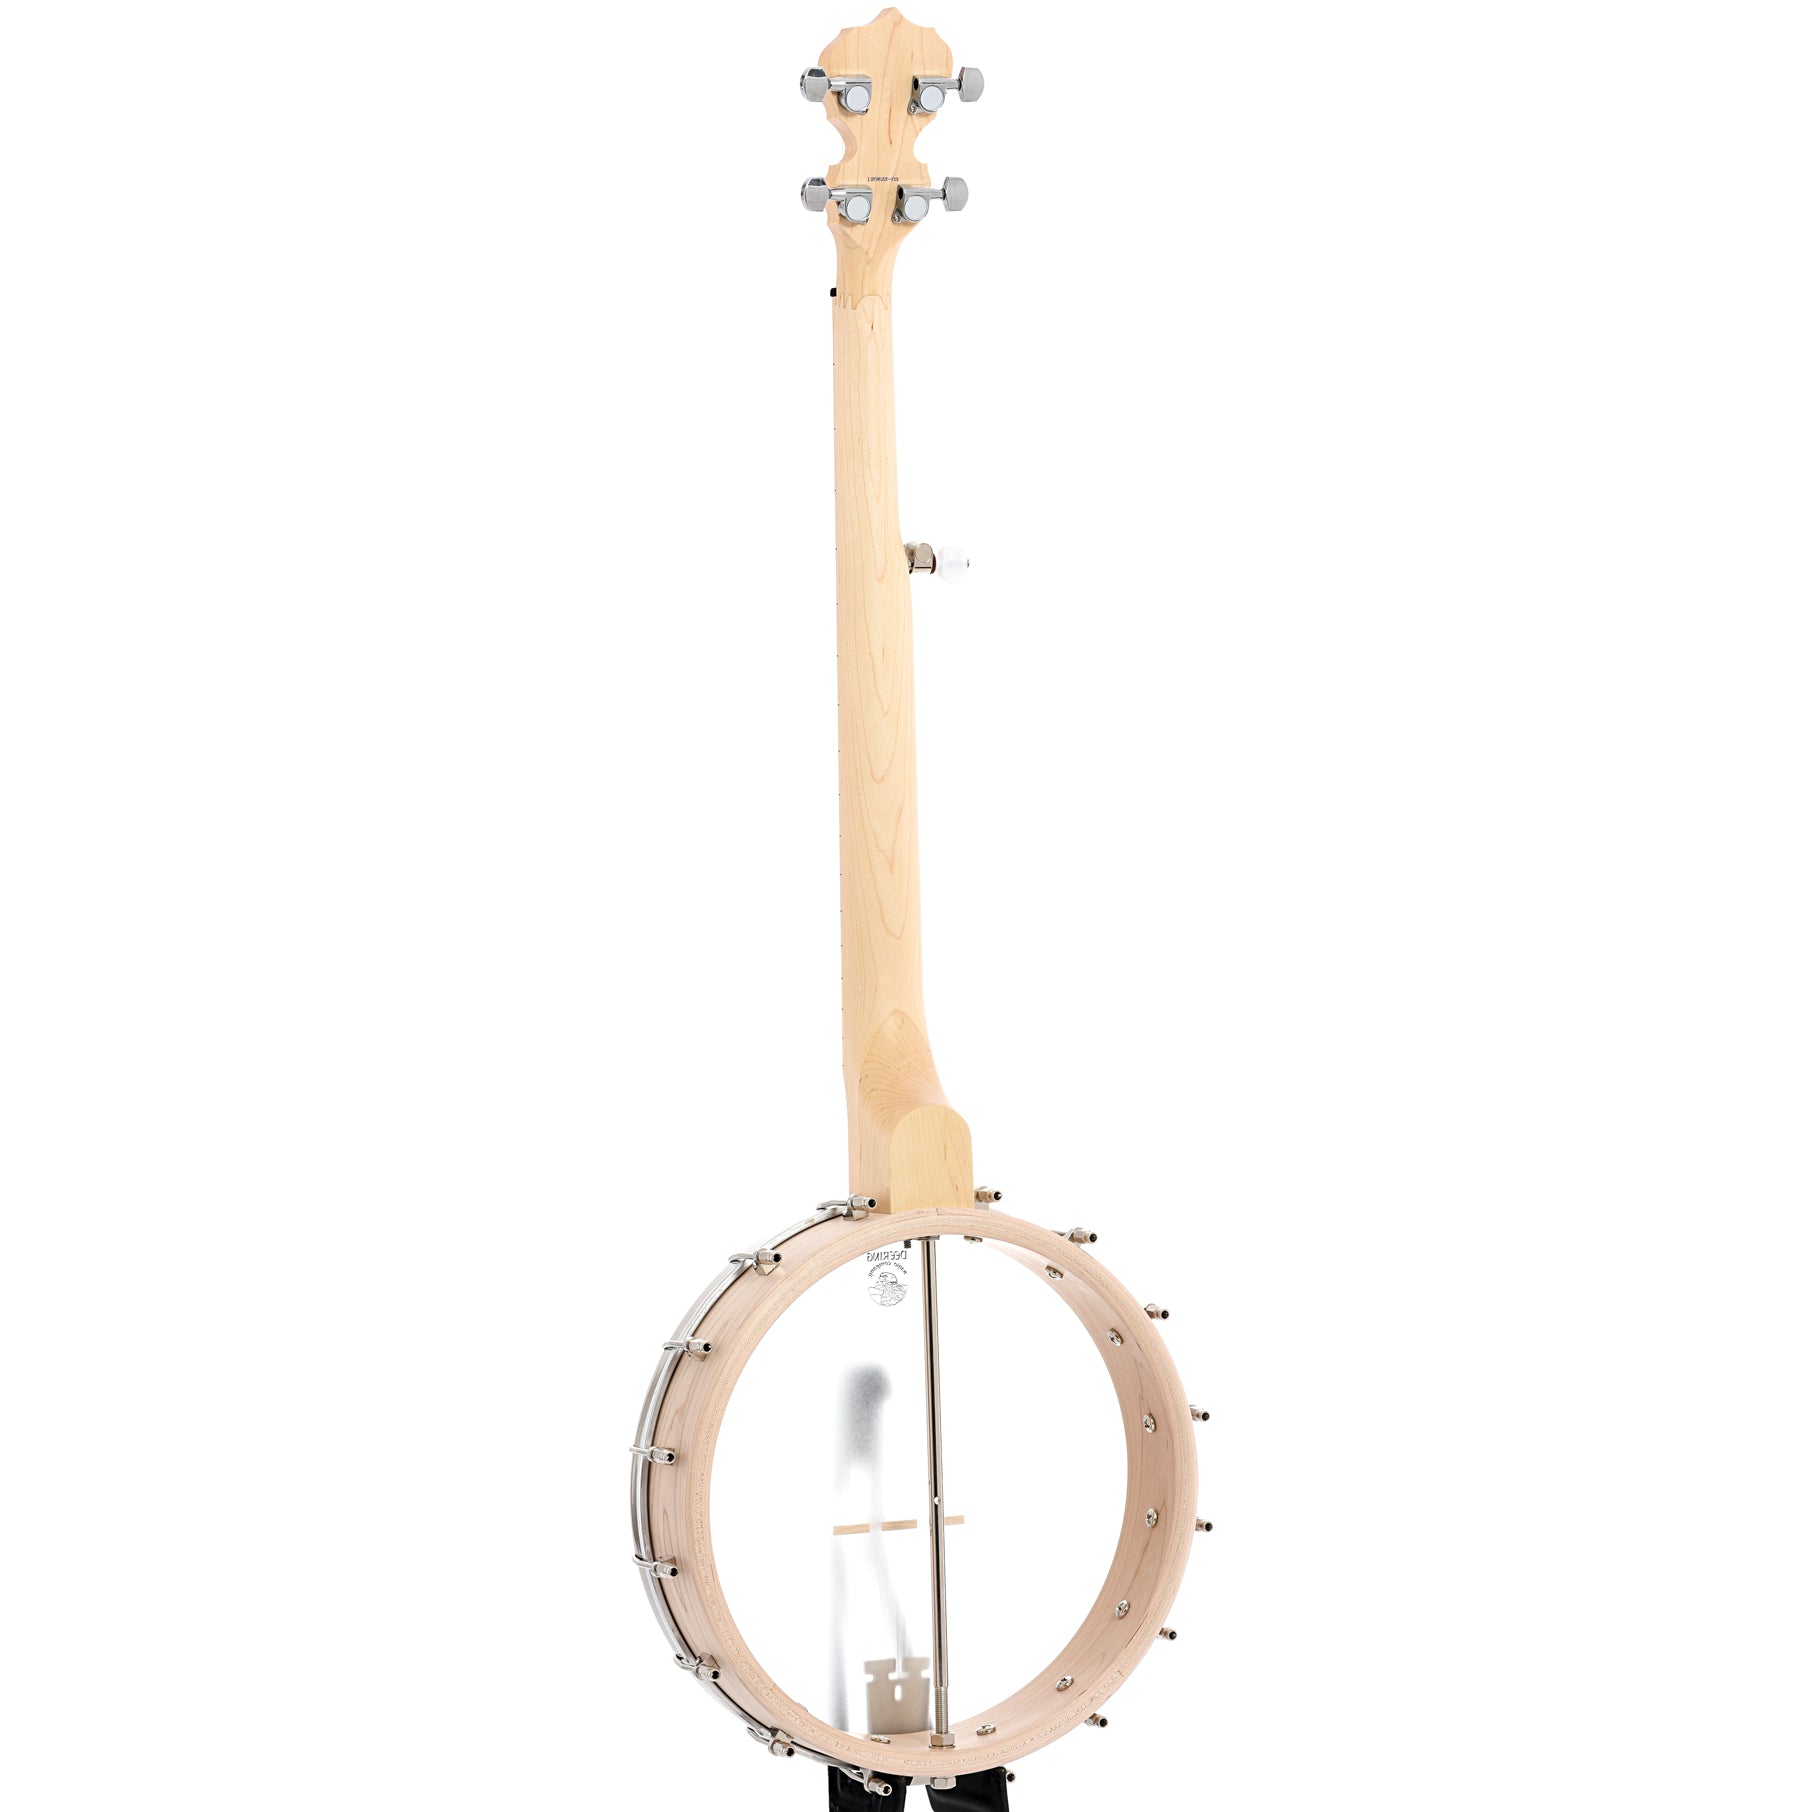 Full back and side of Deering Goodtime Americana 12" Openback Banjo with Scooped Fretboard